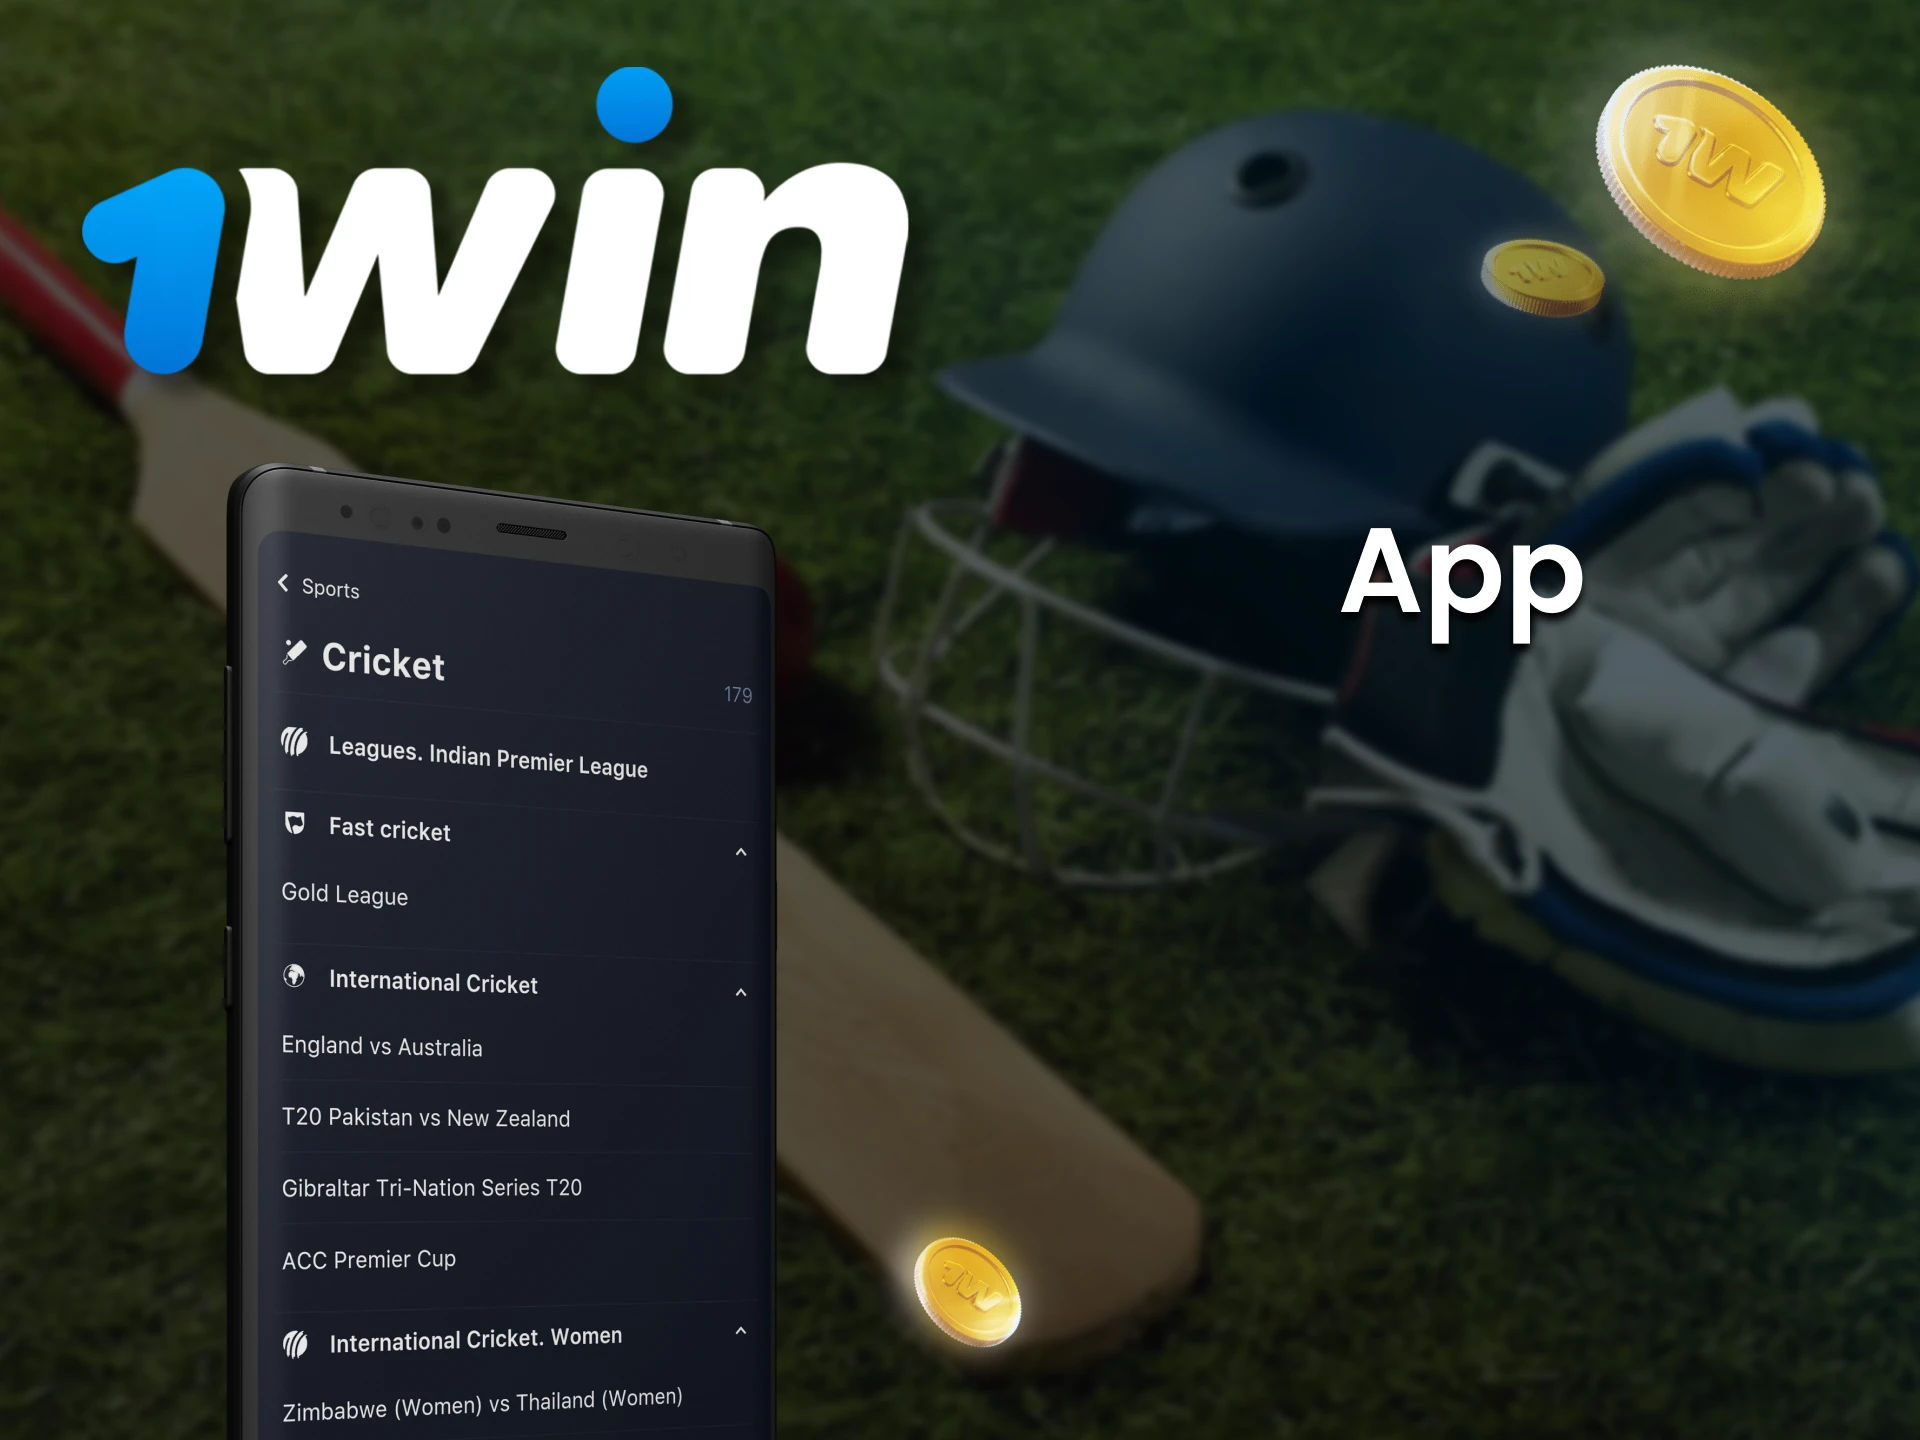 Bet on cricket with the 1win app.